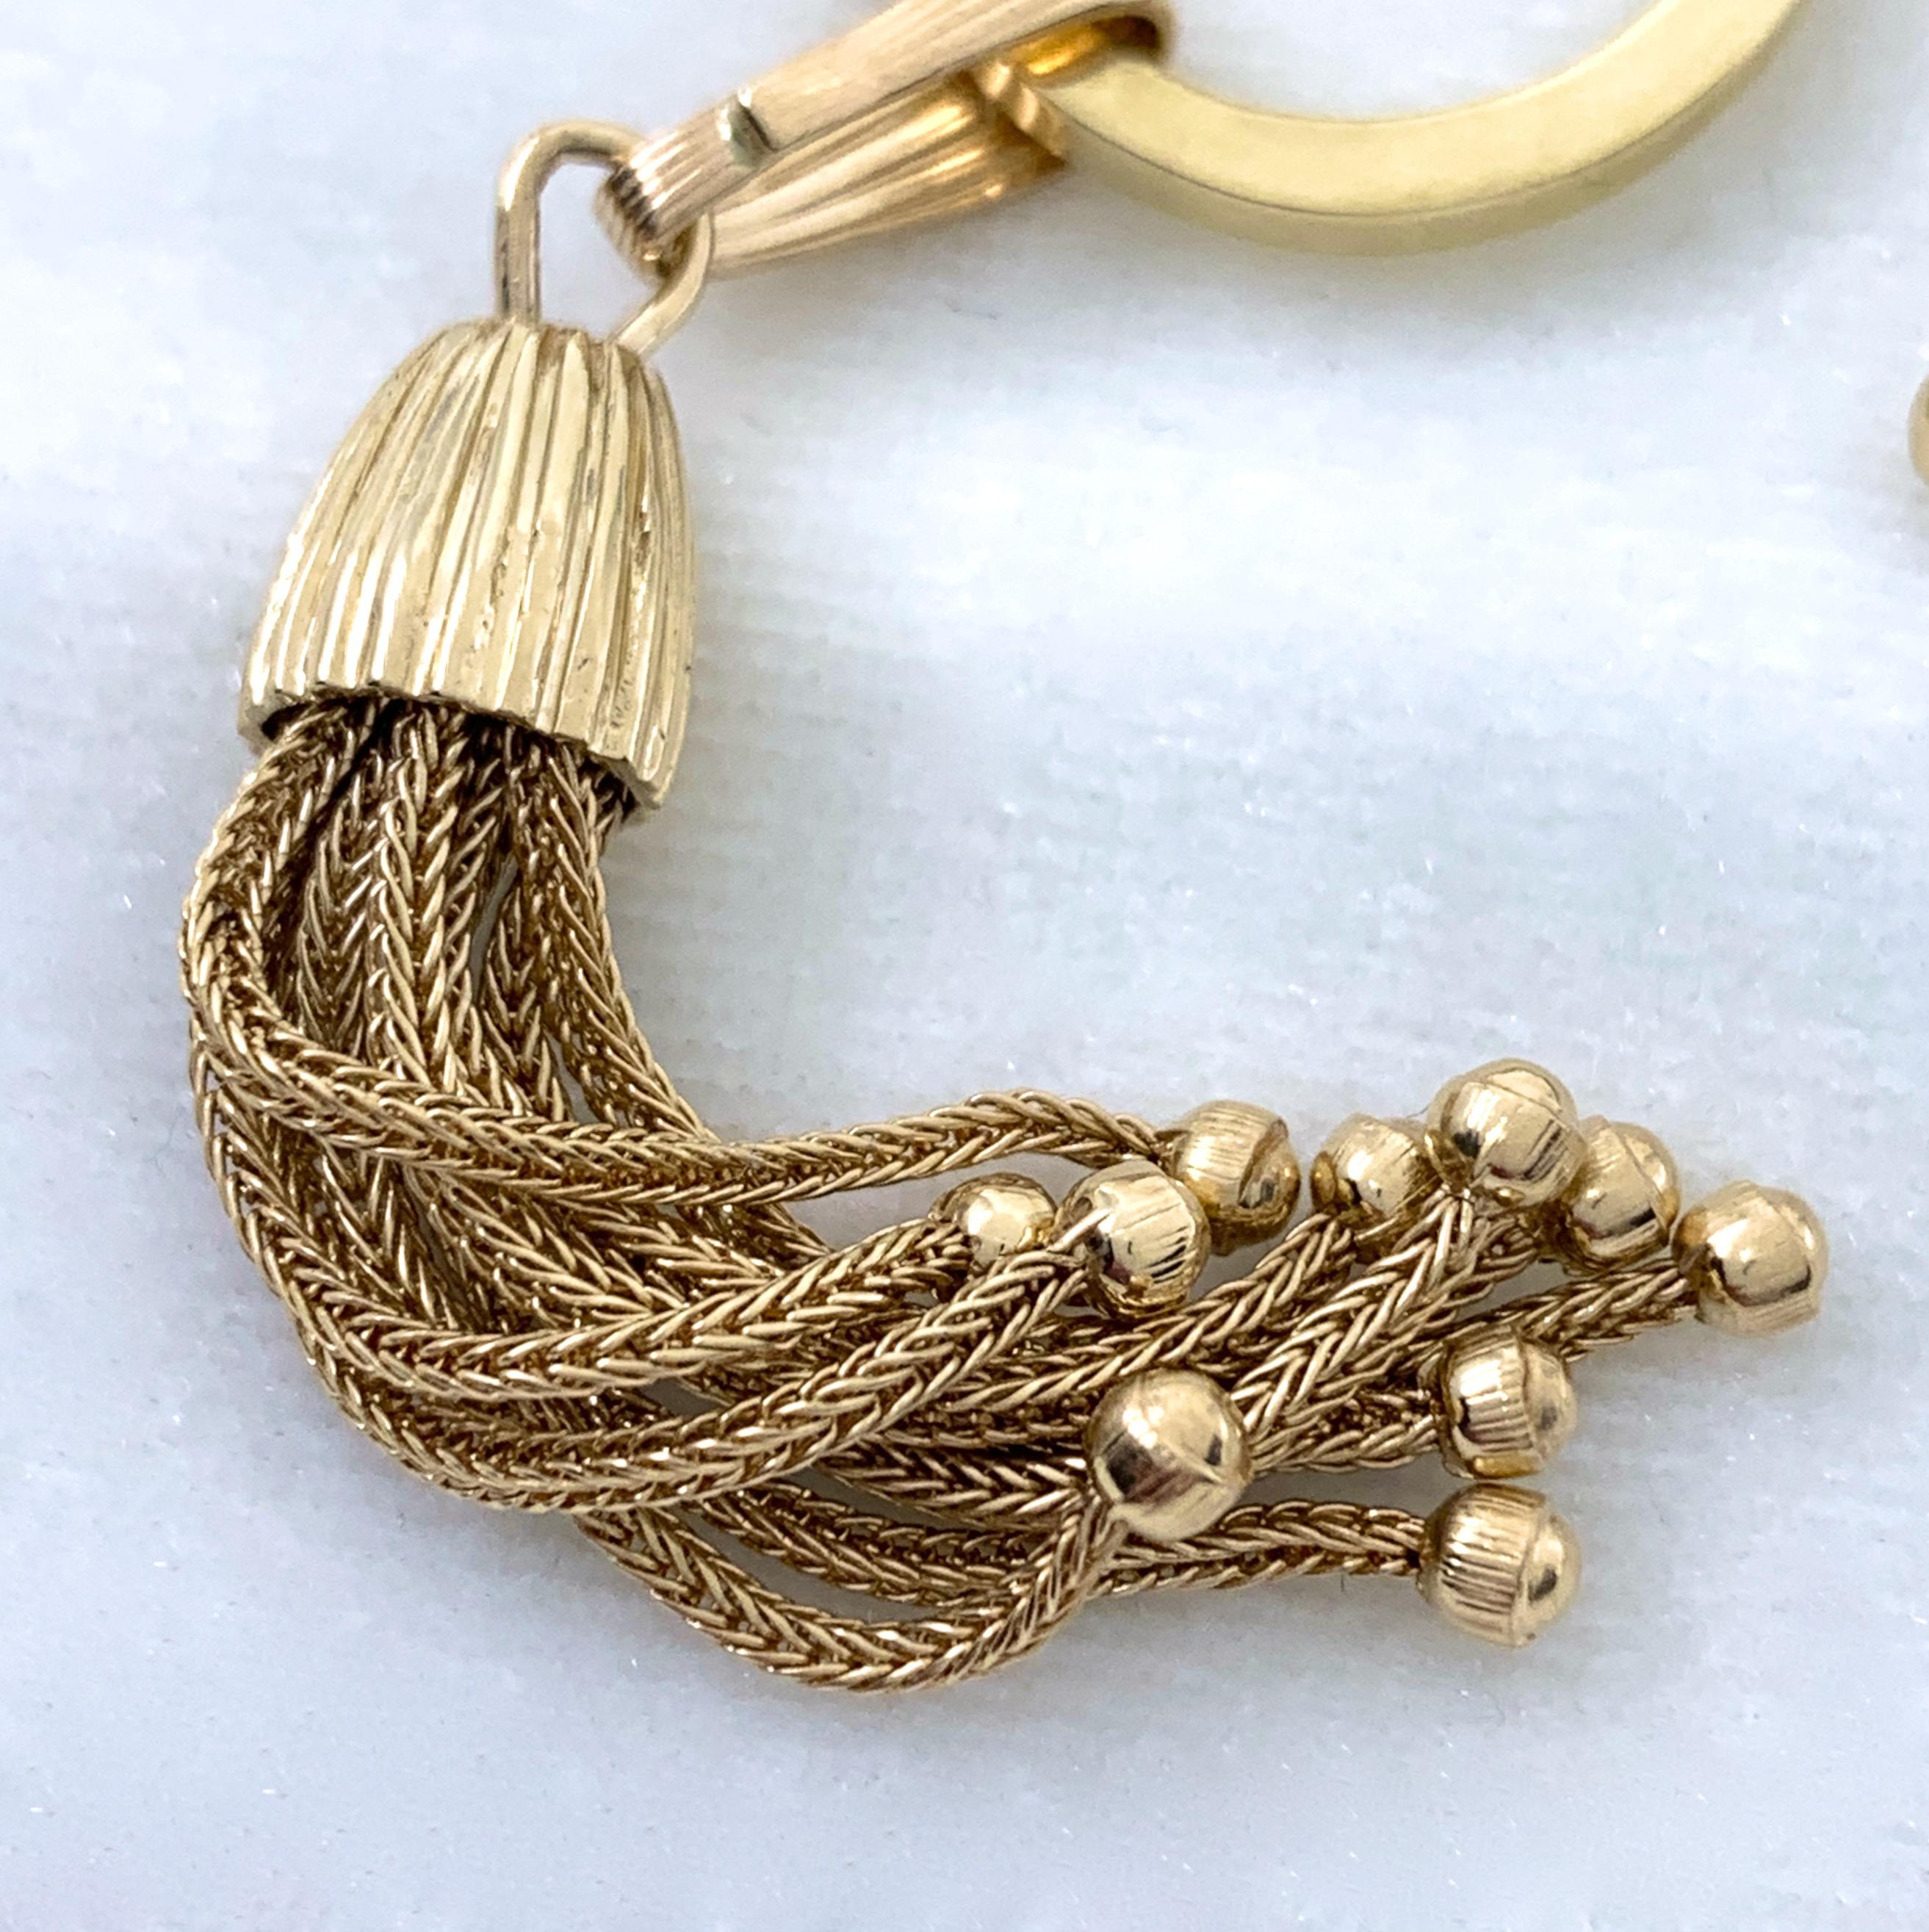 Princess Length Curb Chain with Toggle Closure & Tassel Ornament in Yellow Gold For Sale 2